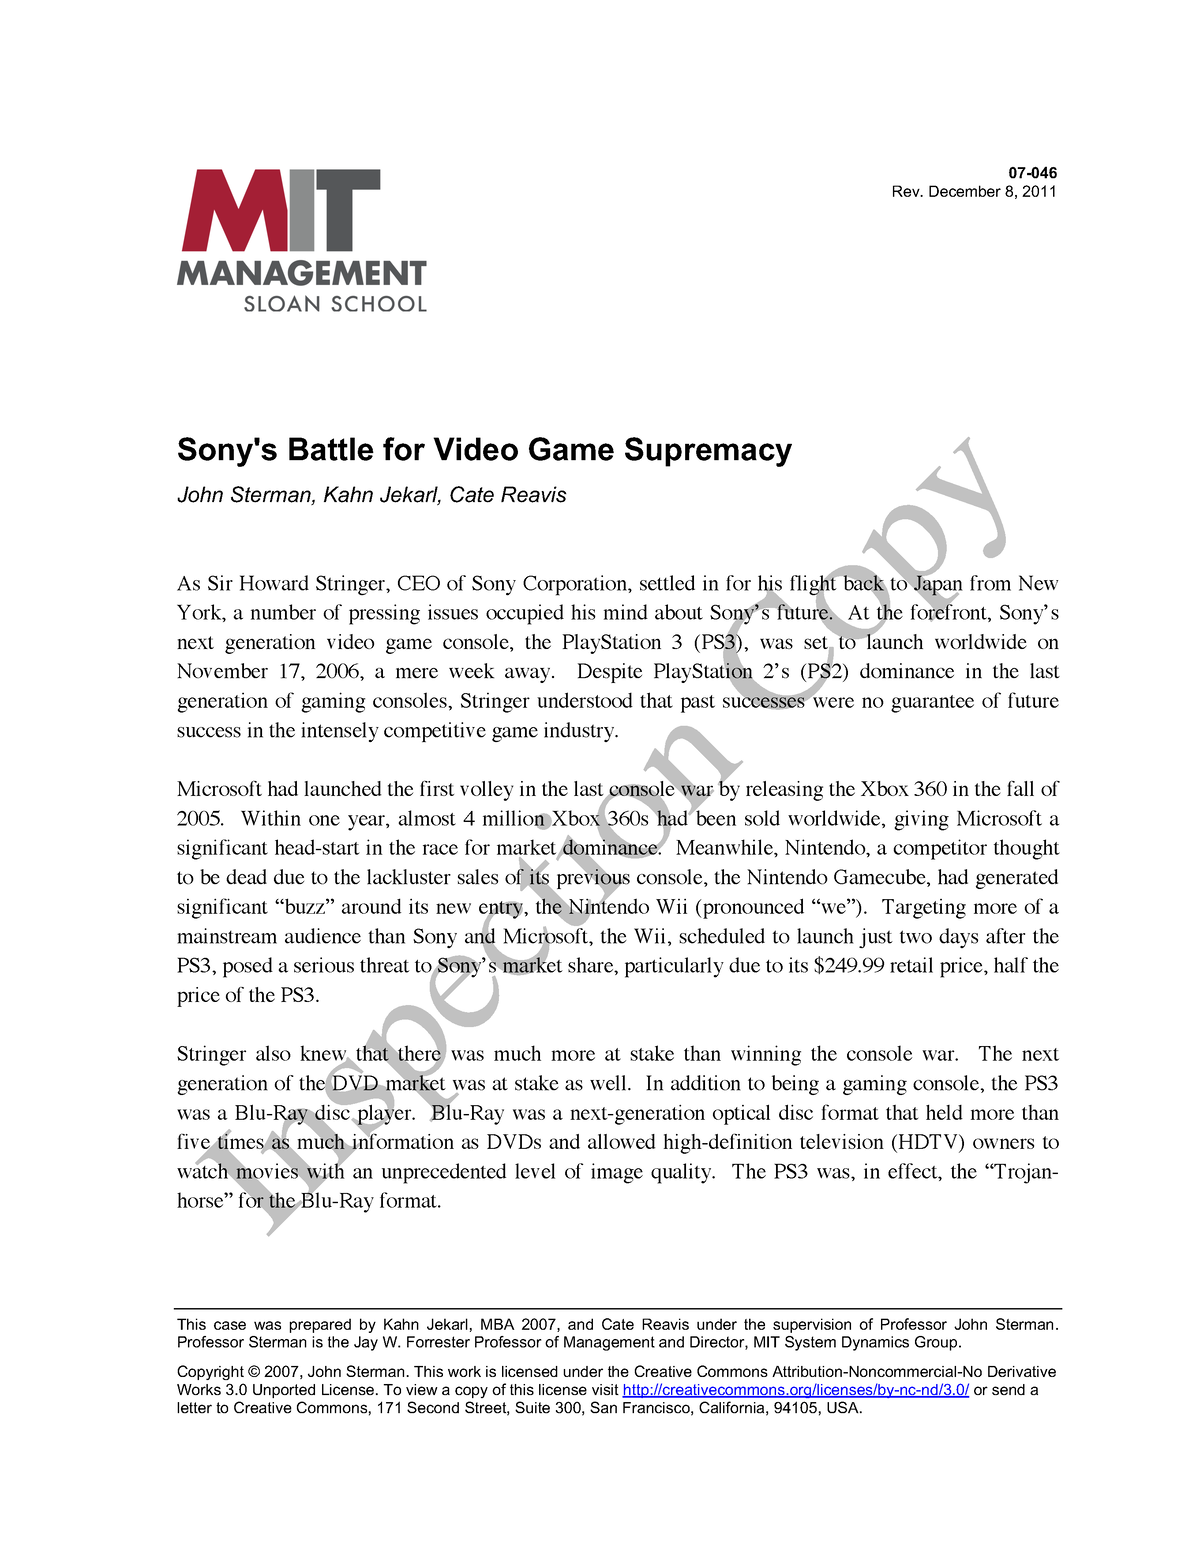 sony's battle for video game supremacy case study answers